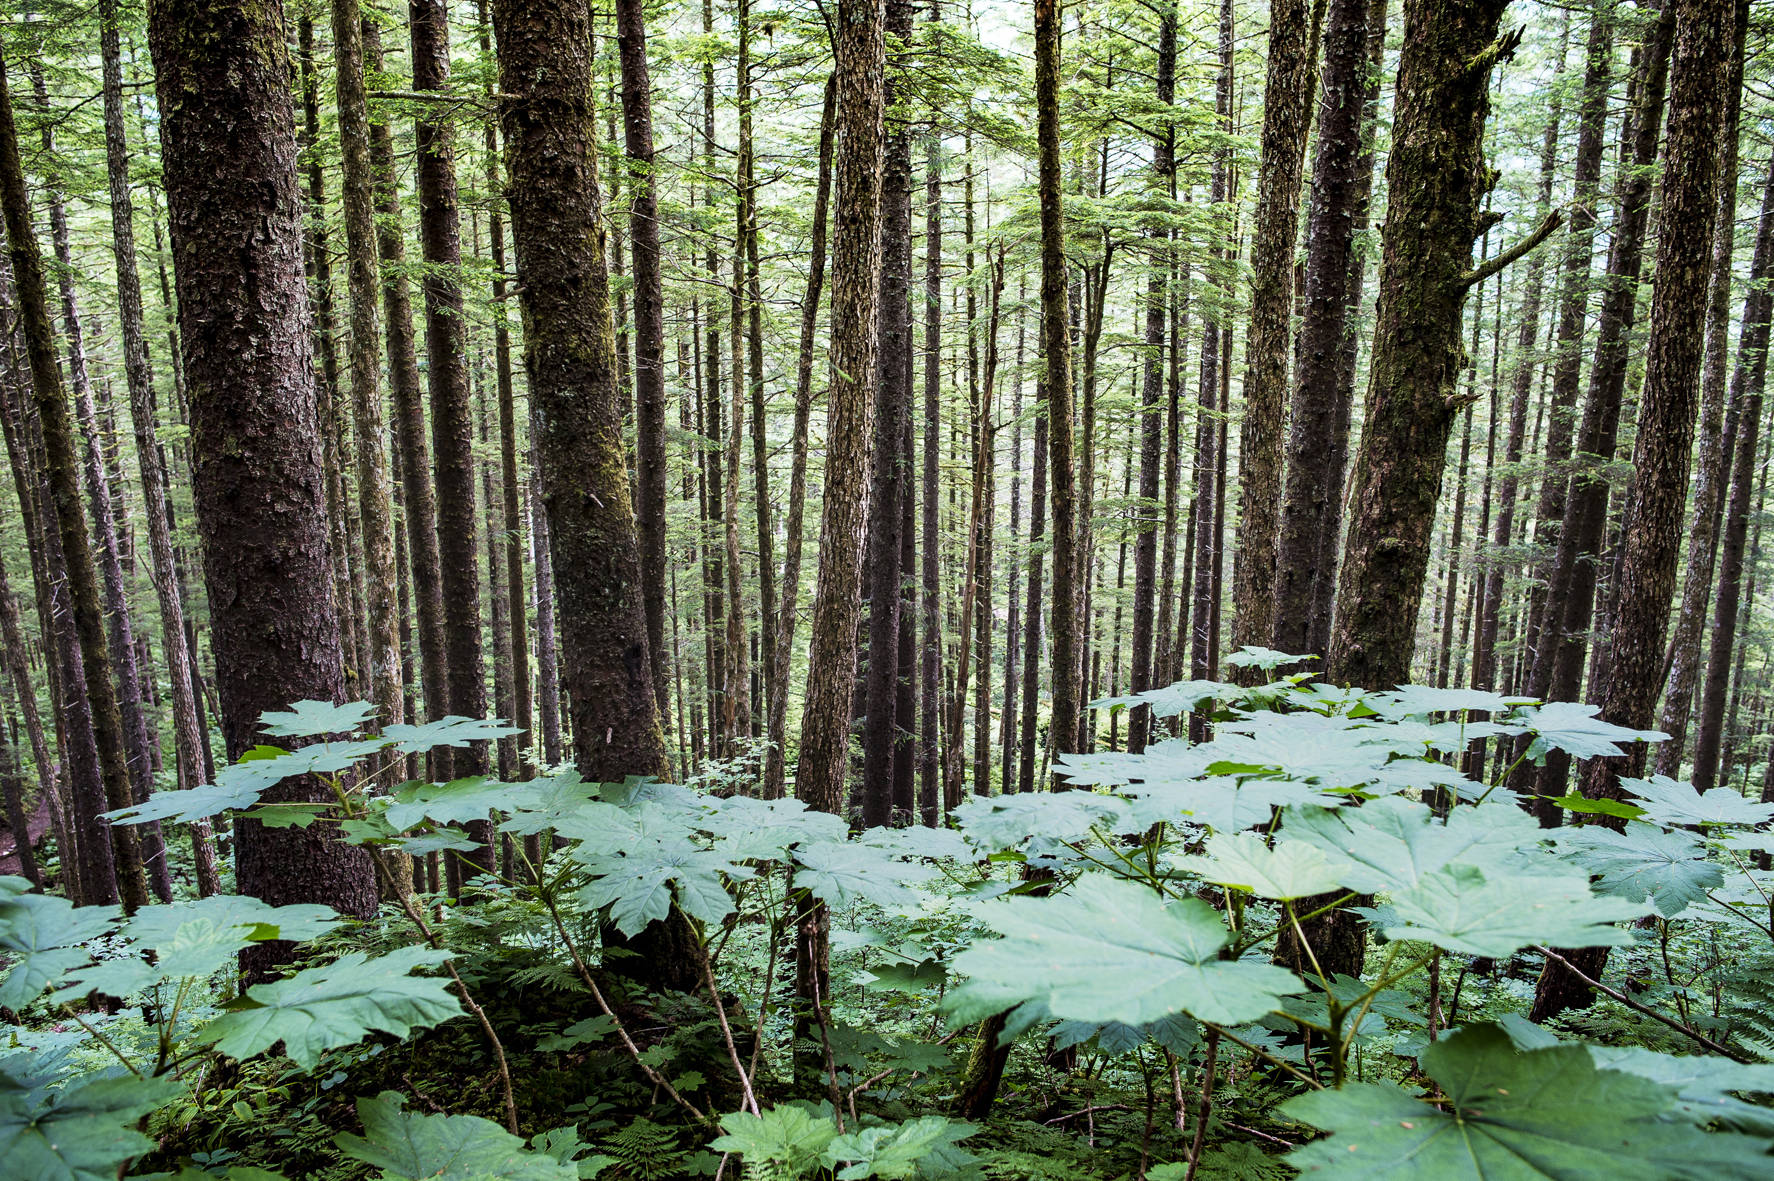 The Tongass National Forest is the largest national forest in the United States at 17 million acres. (Juneau Empire File)